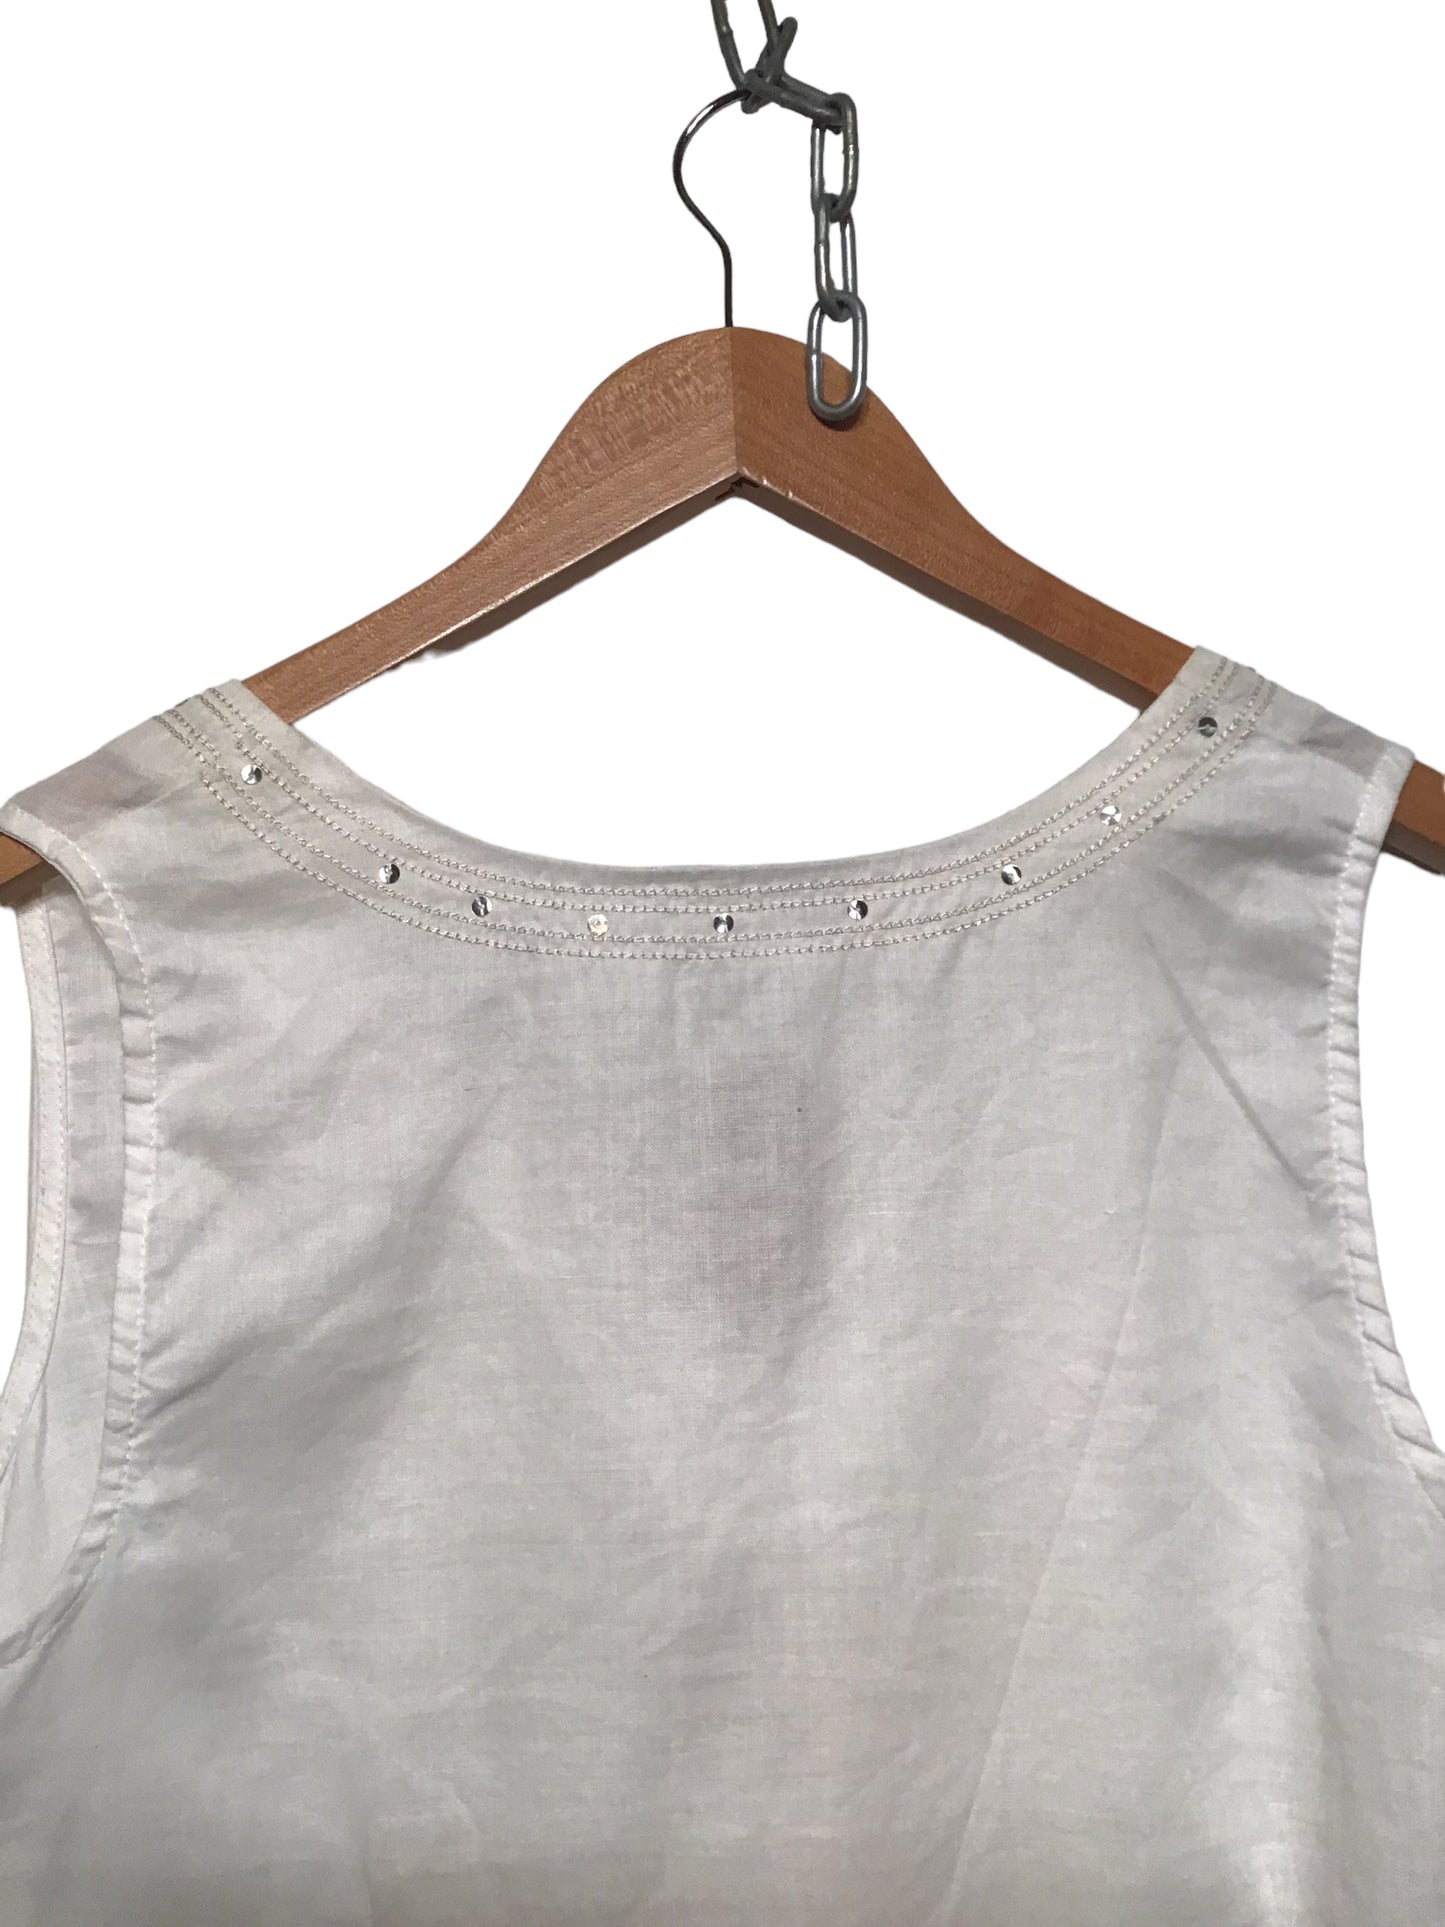 B.Young Sleeveless Top (Size L)